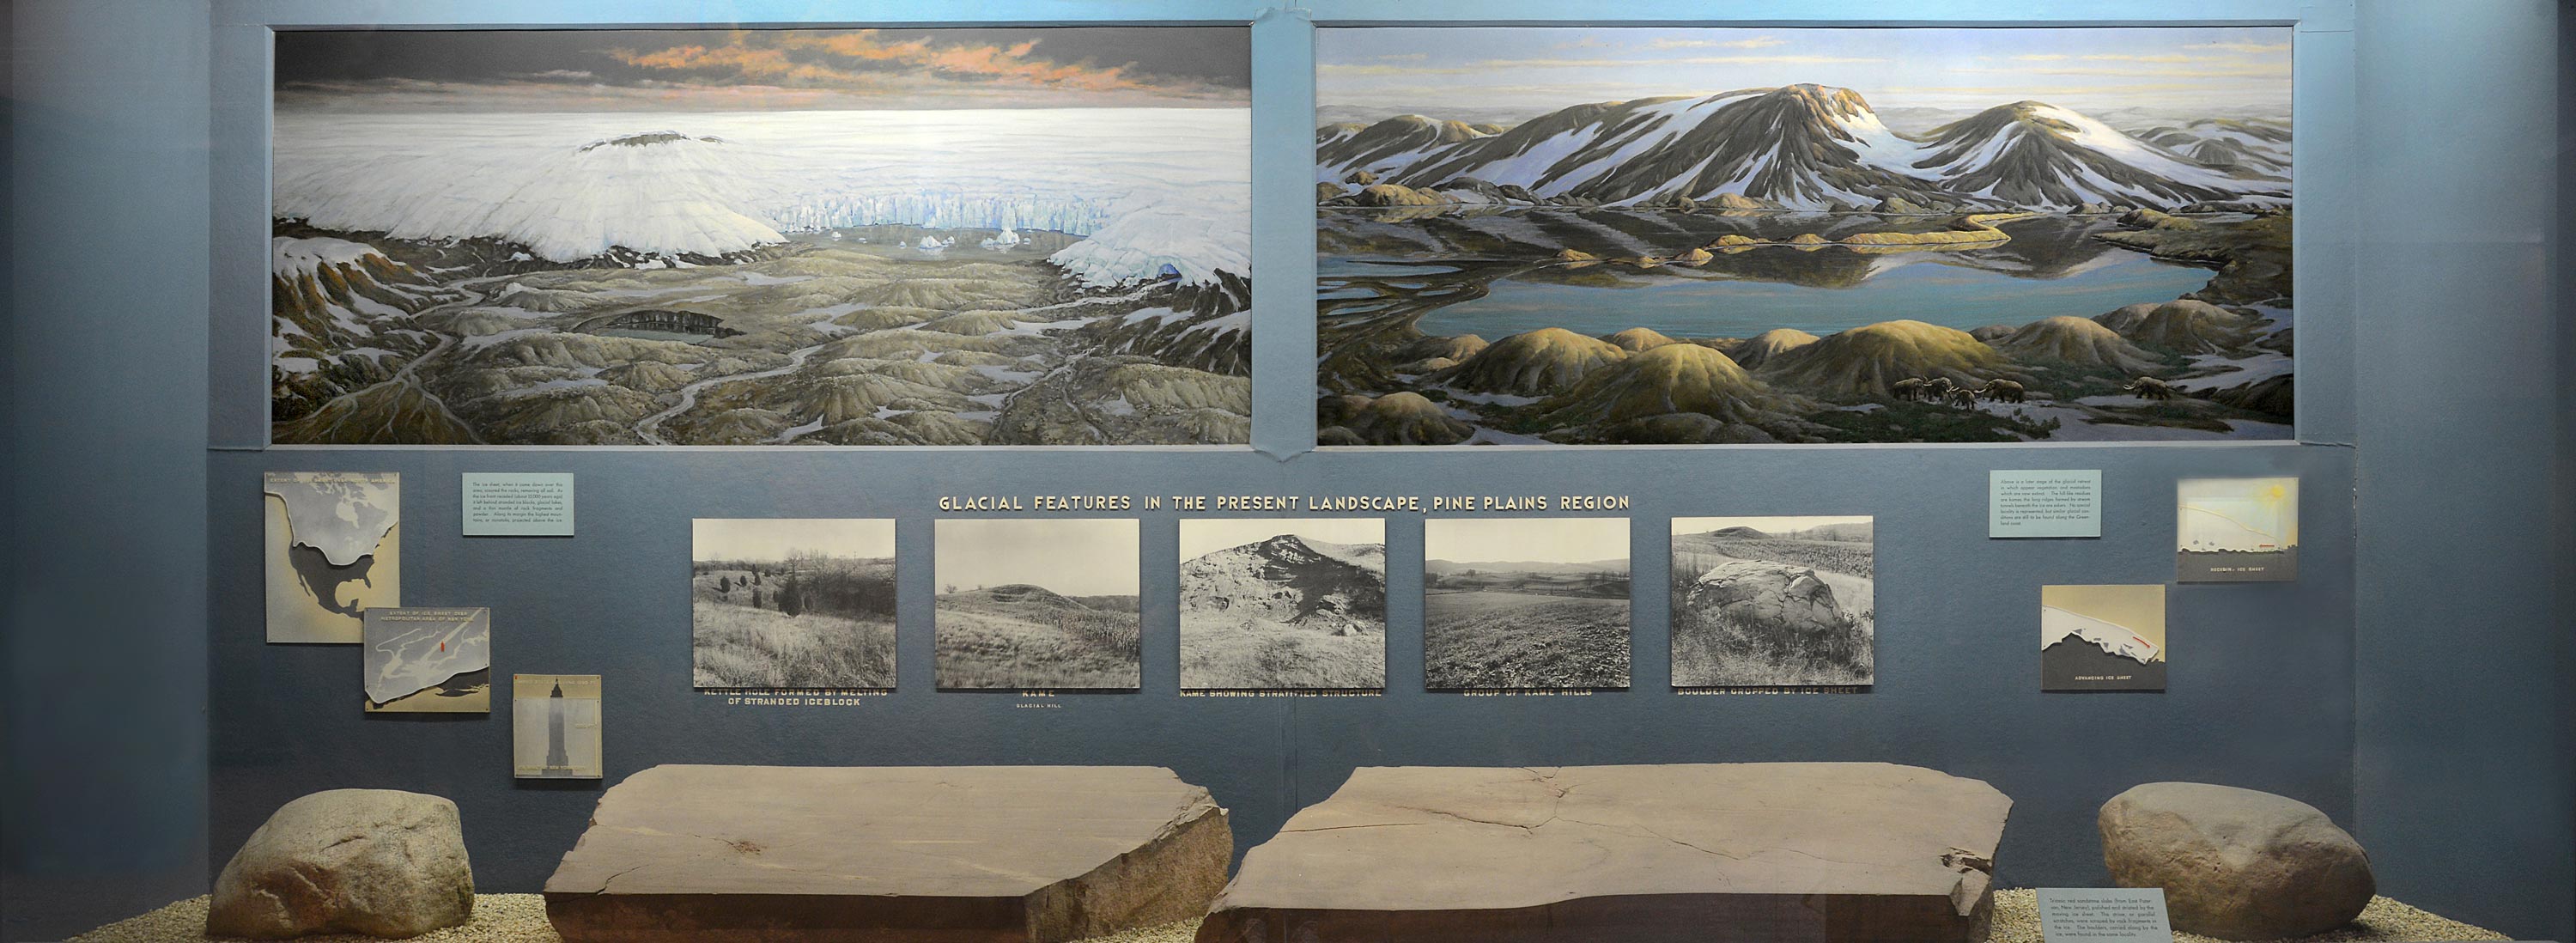 Museum case showing paintings of ice sheet and glacial retreat and sandstone slabs among other pictures and text.